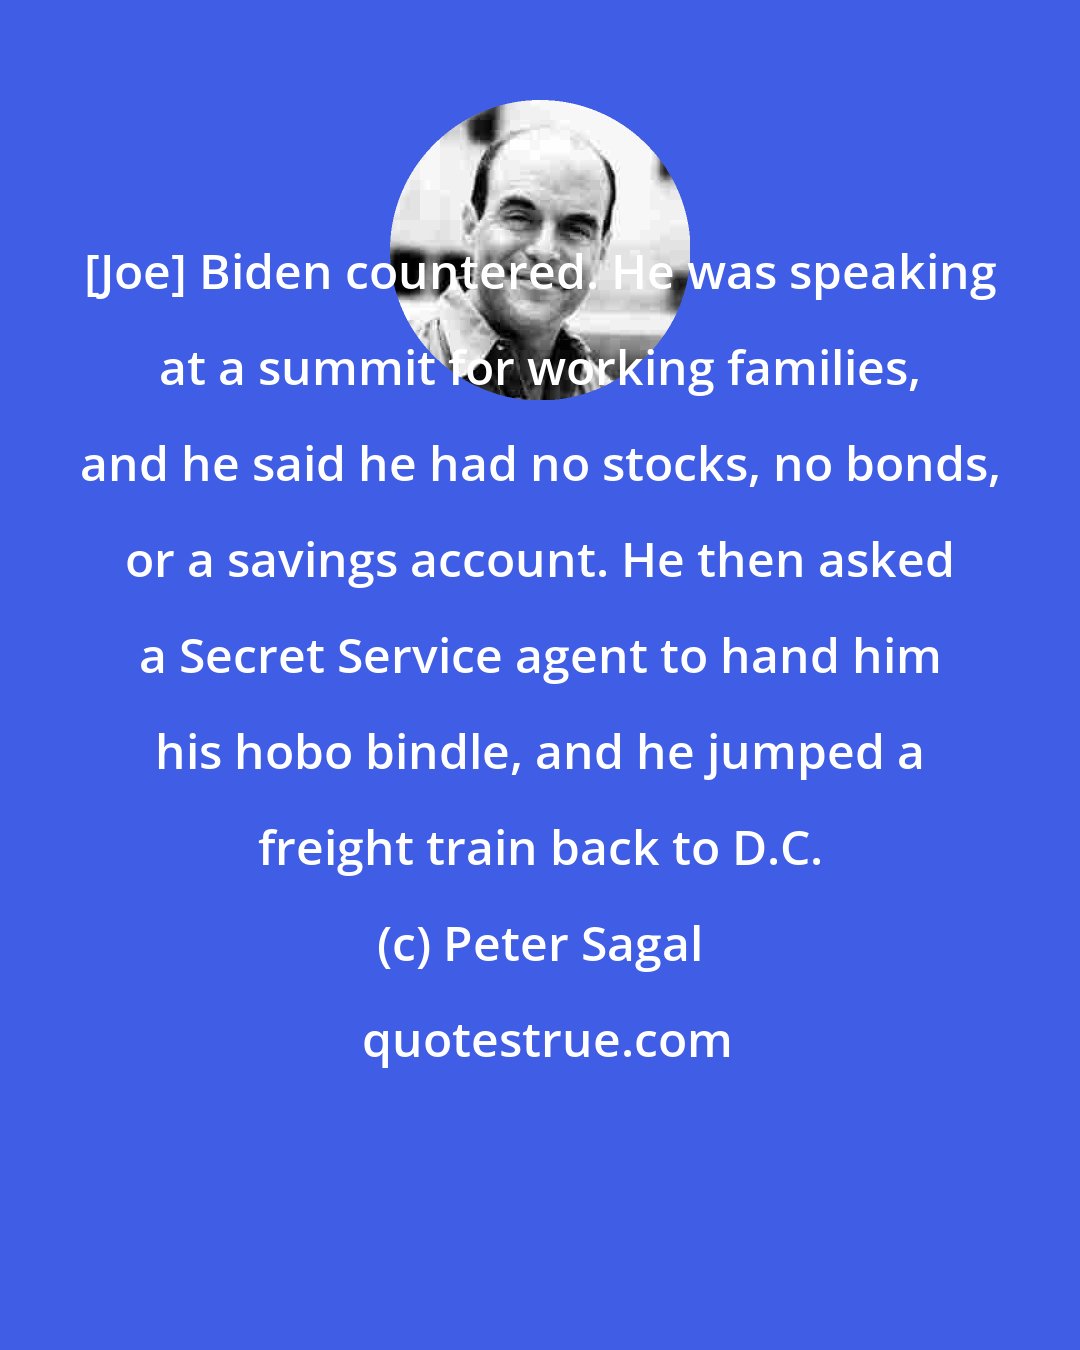 Peter Sagal: [Joe] Biden countered. He was speaking at a summit for working families, and he said he had no stocks, no bonds, or a savings account. He then asked a Secret Service agent to hand him his hobo bindle, and he jumped a freight train back to D.C.